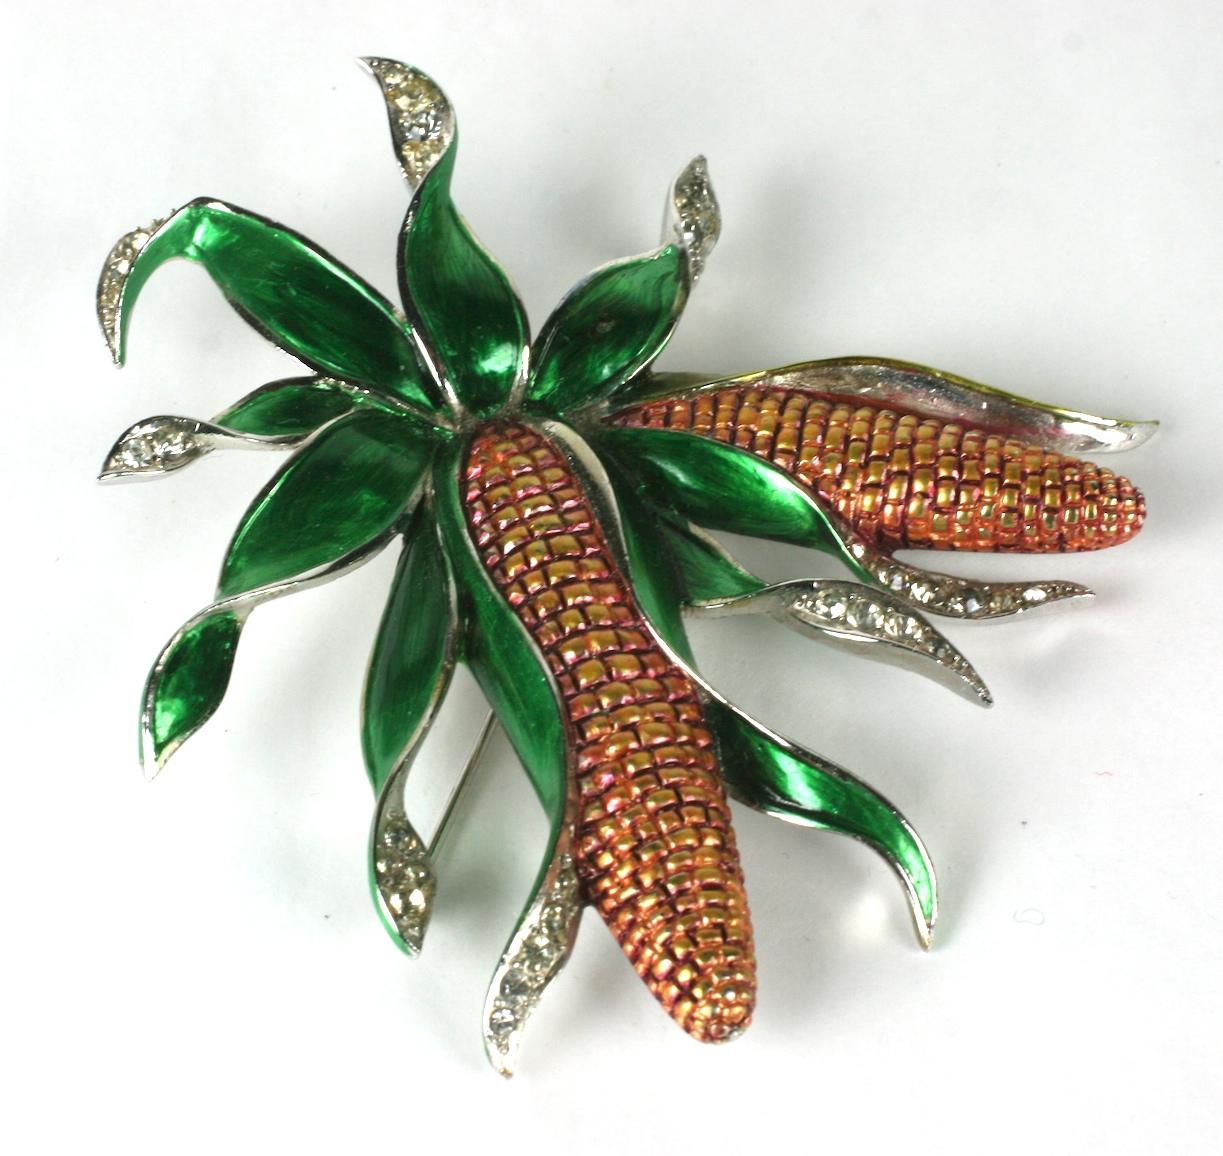 Rare and super collectible Marcel Boucher pearlized enamel corn on the cob brooch from 1941.
Of rhodium plated metal, crystal rhinestones, hand painted pearlized enameling.
Wonderful large scale and condition. 
Marked: MB phrygian cap, Des